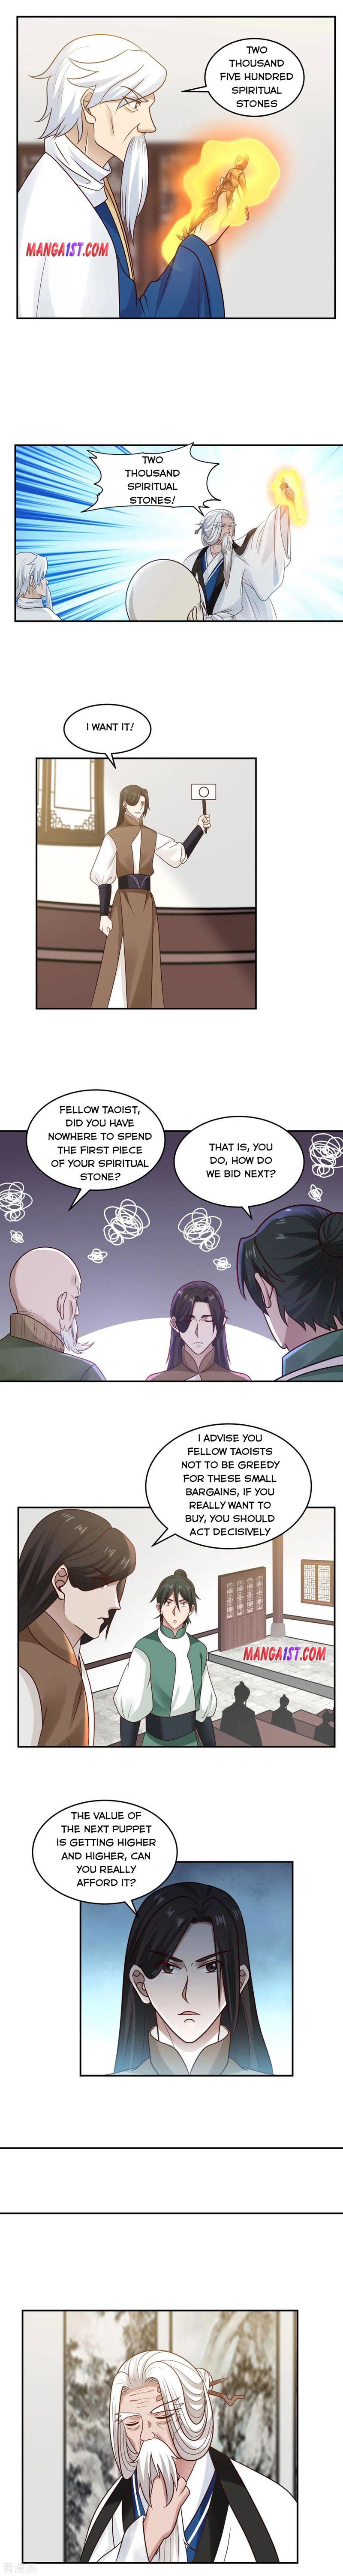 Chaos Alchemist Chapter 127 page 3